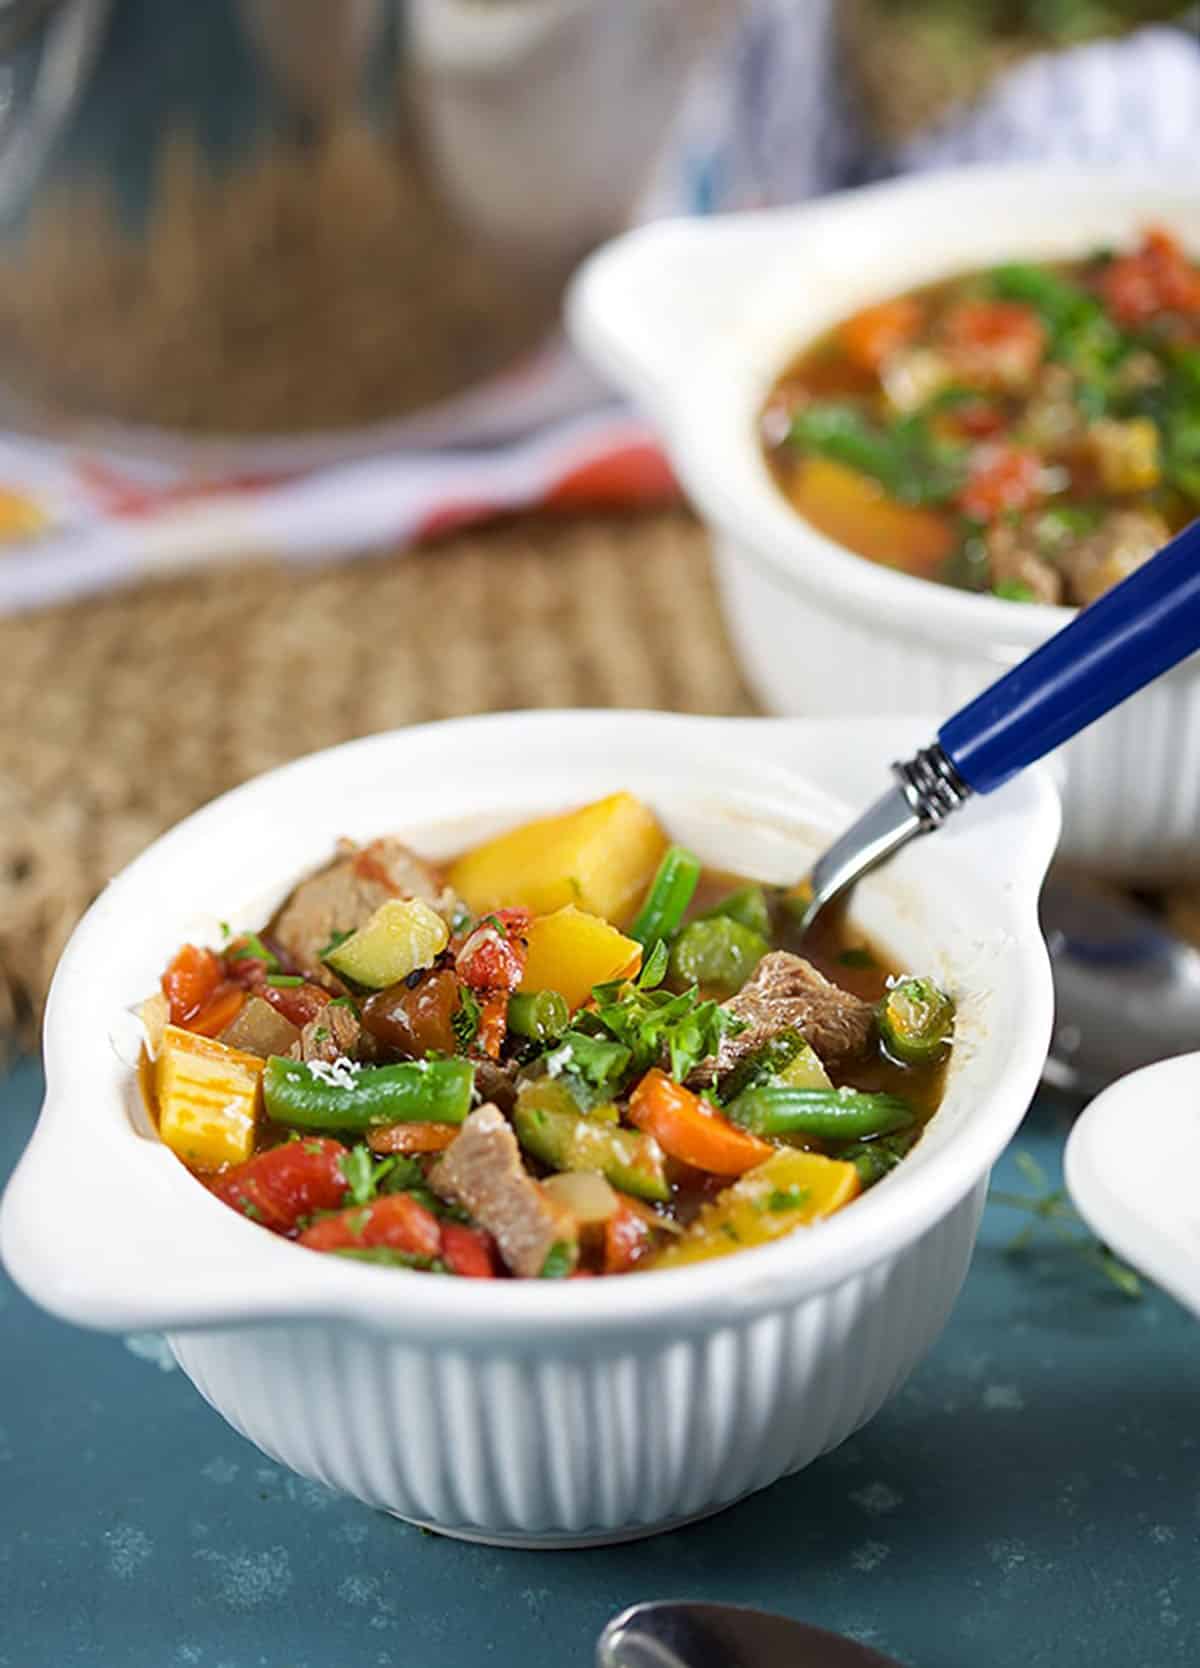 Vegetable Beef Soup in a white bowl with a blue handled spoon.